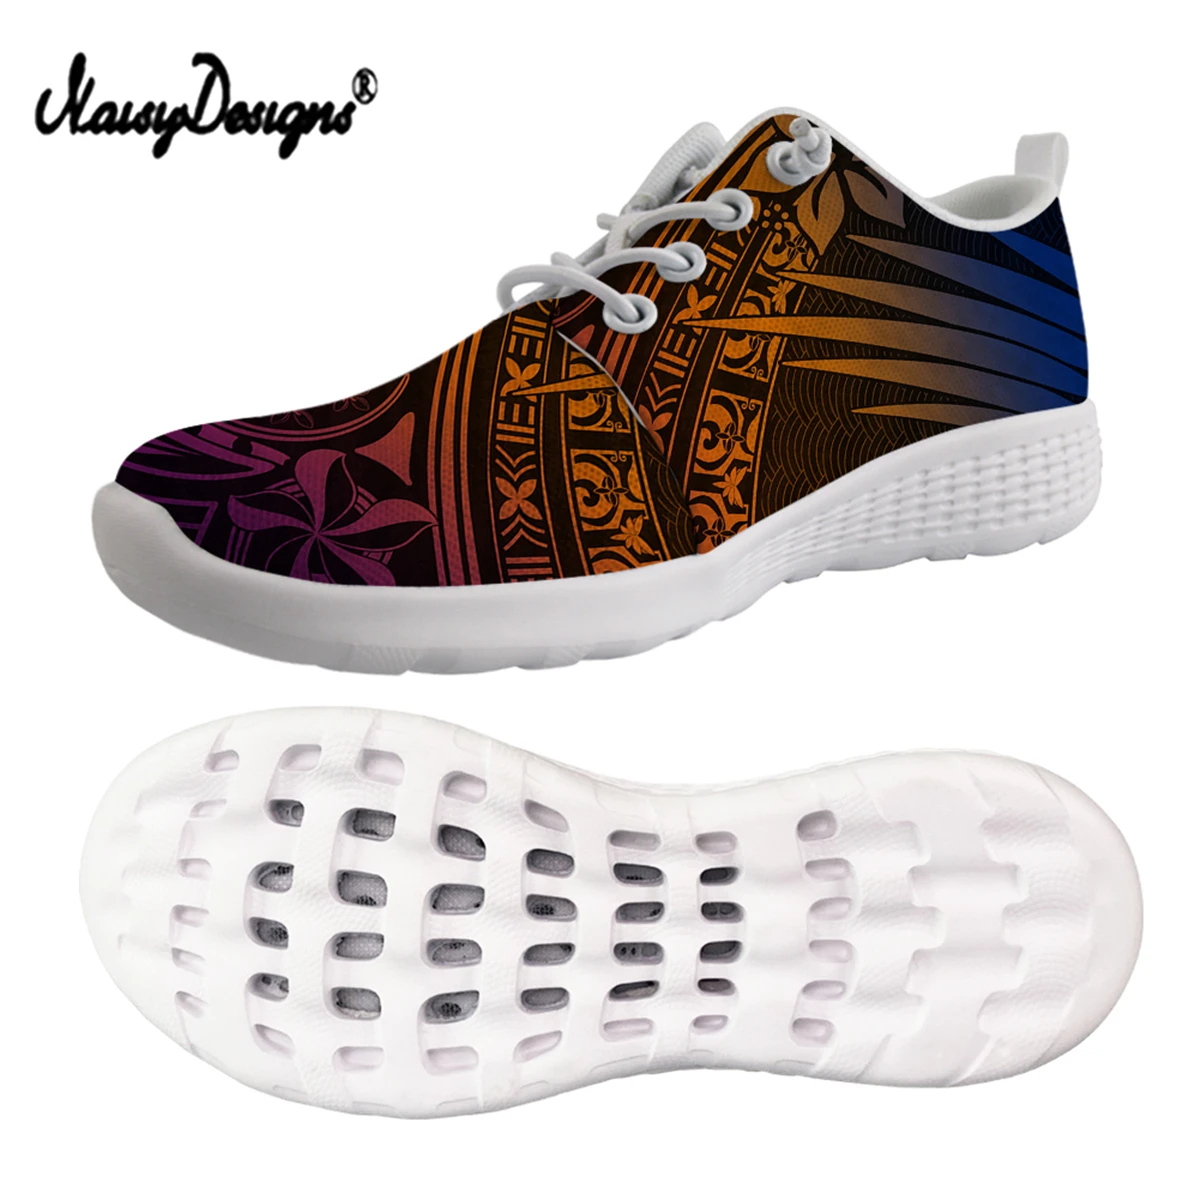 

Noisydesigns Water Shoes Gradient Polyneisan Tribe Pattern Men Sneakers Barefoot Outdoor Beach Upstream Quick-Dry Aqua Shoes